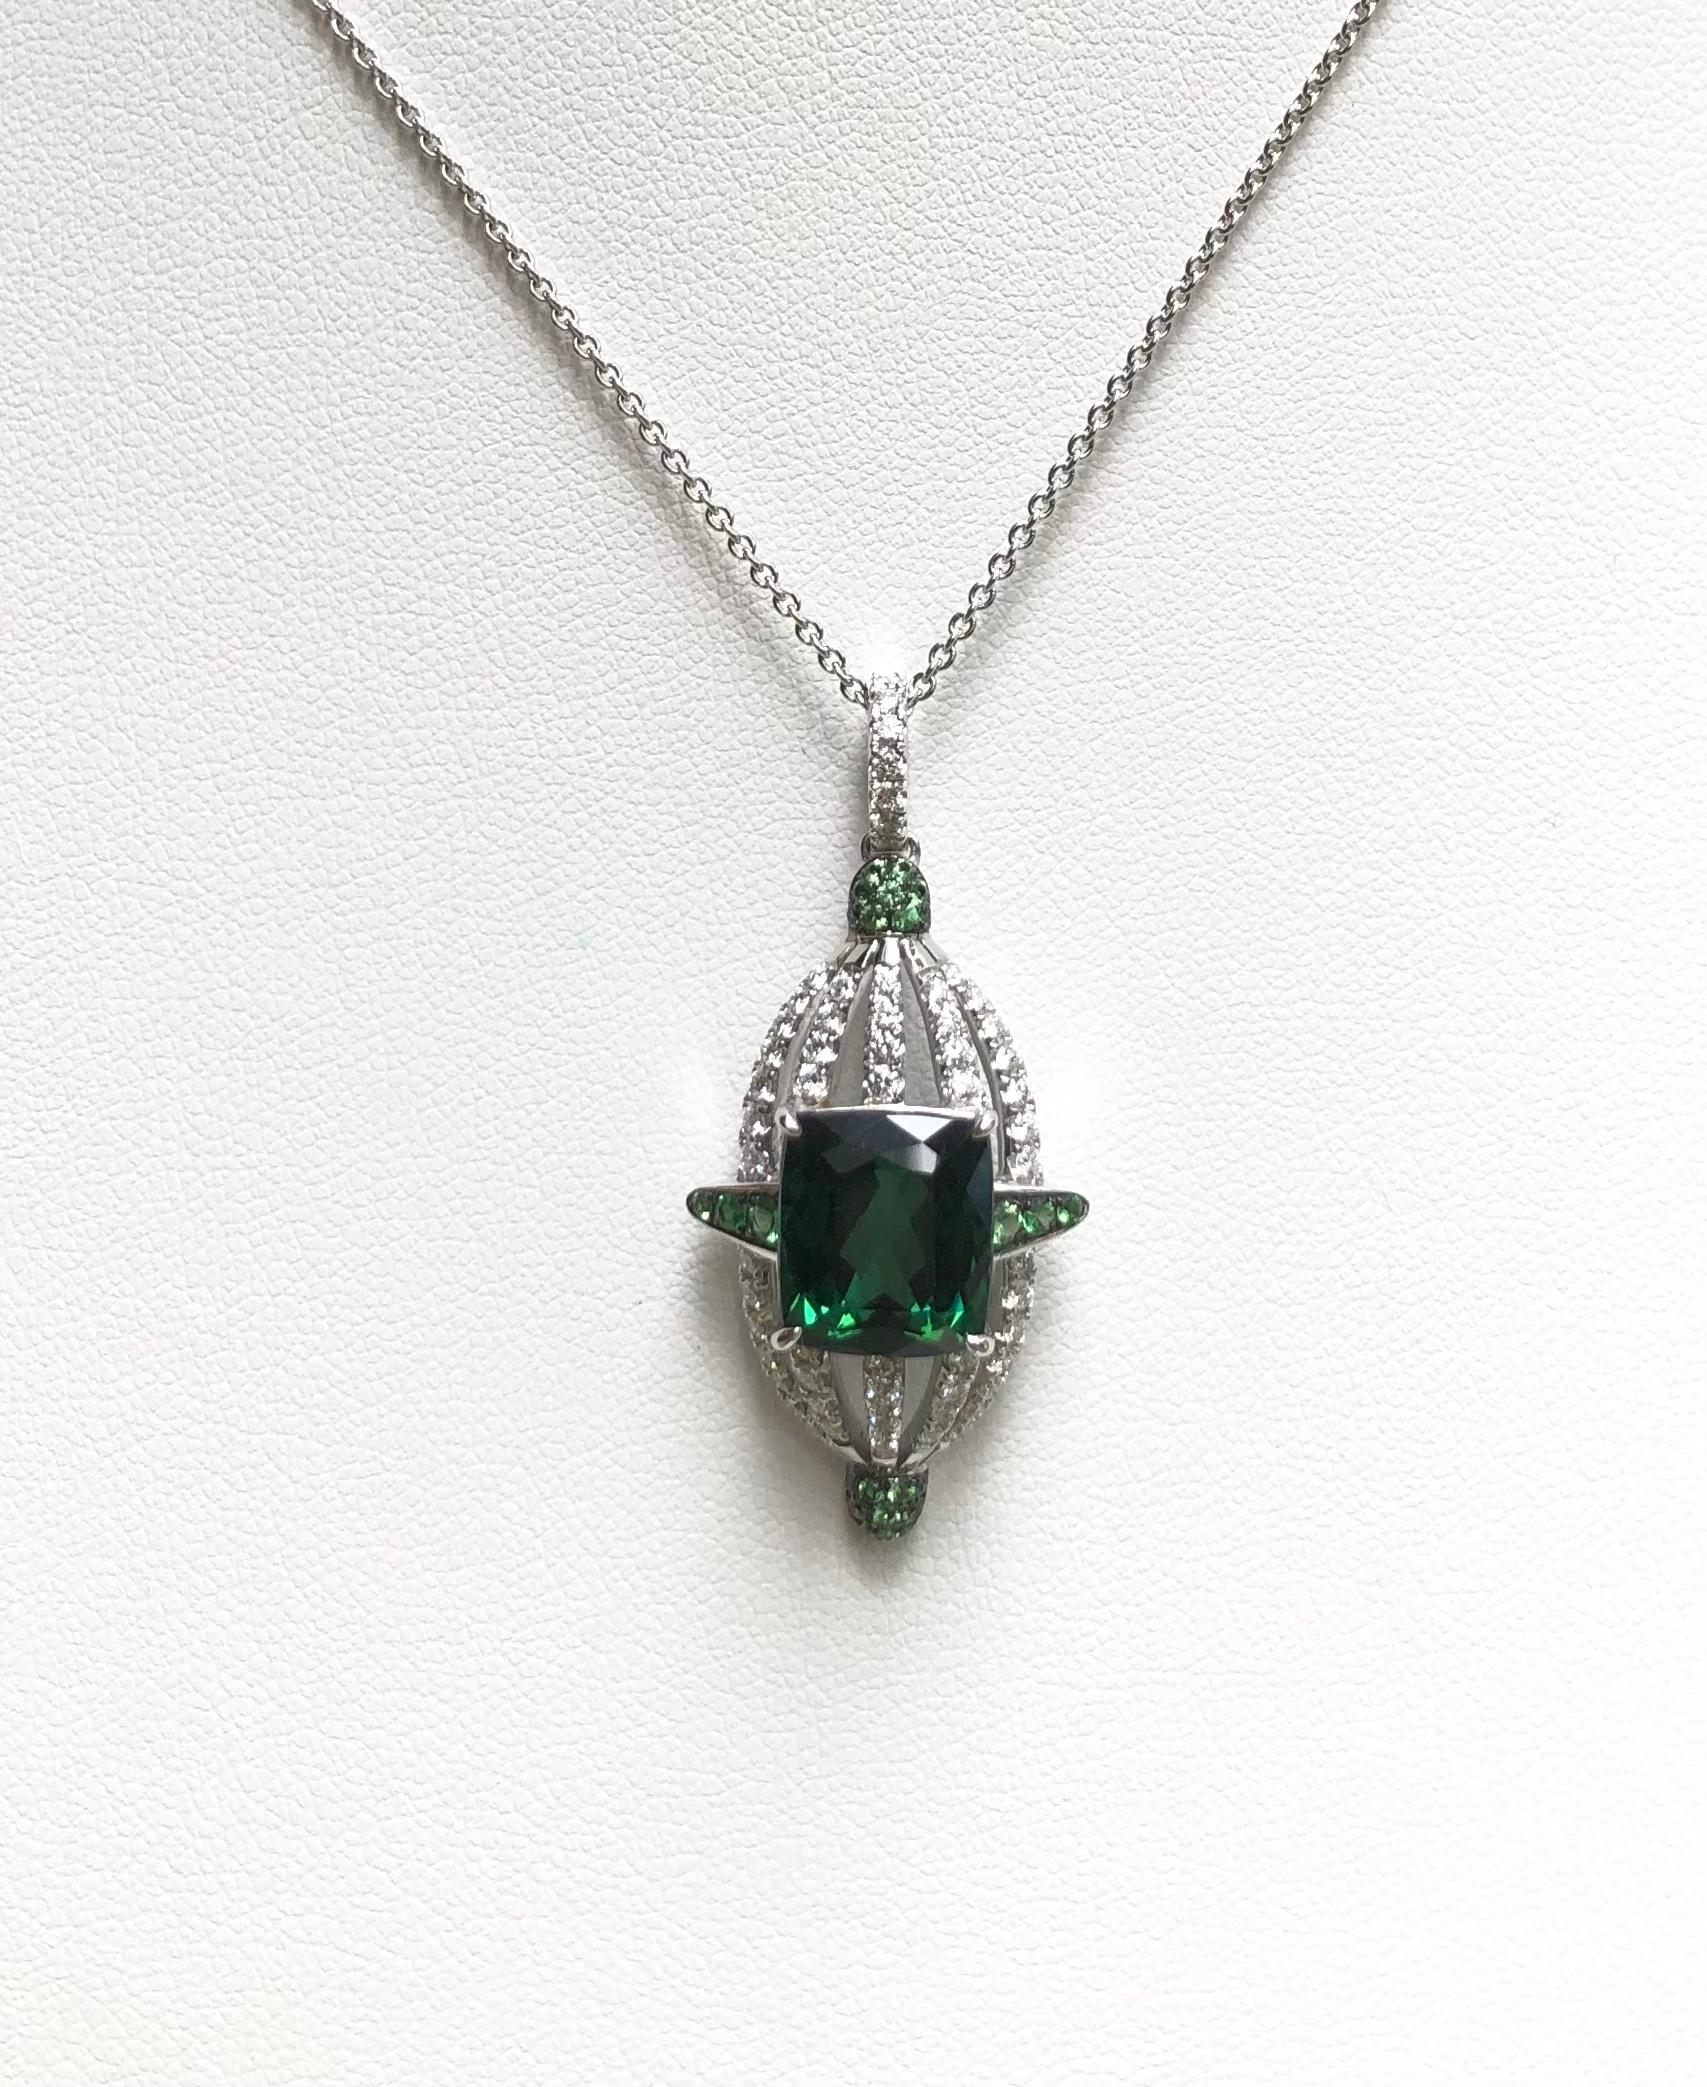 Green Tourmaline 5.55 carats with Tsavorite 0.30 carat and Diamond 0.58 carat Pendant set in 18 Karat White Gold Settings
(chain not included)

Width: 1.9 cm 
Length: 4.1 cm
Total Weight: 6.38 grams

